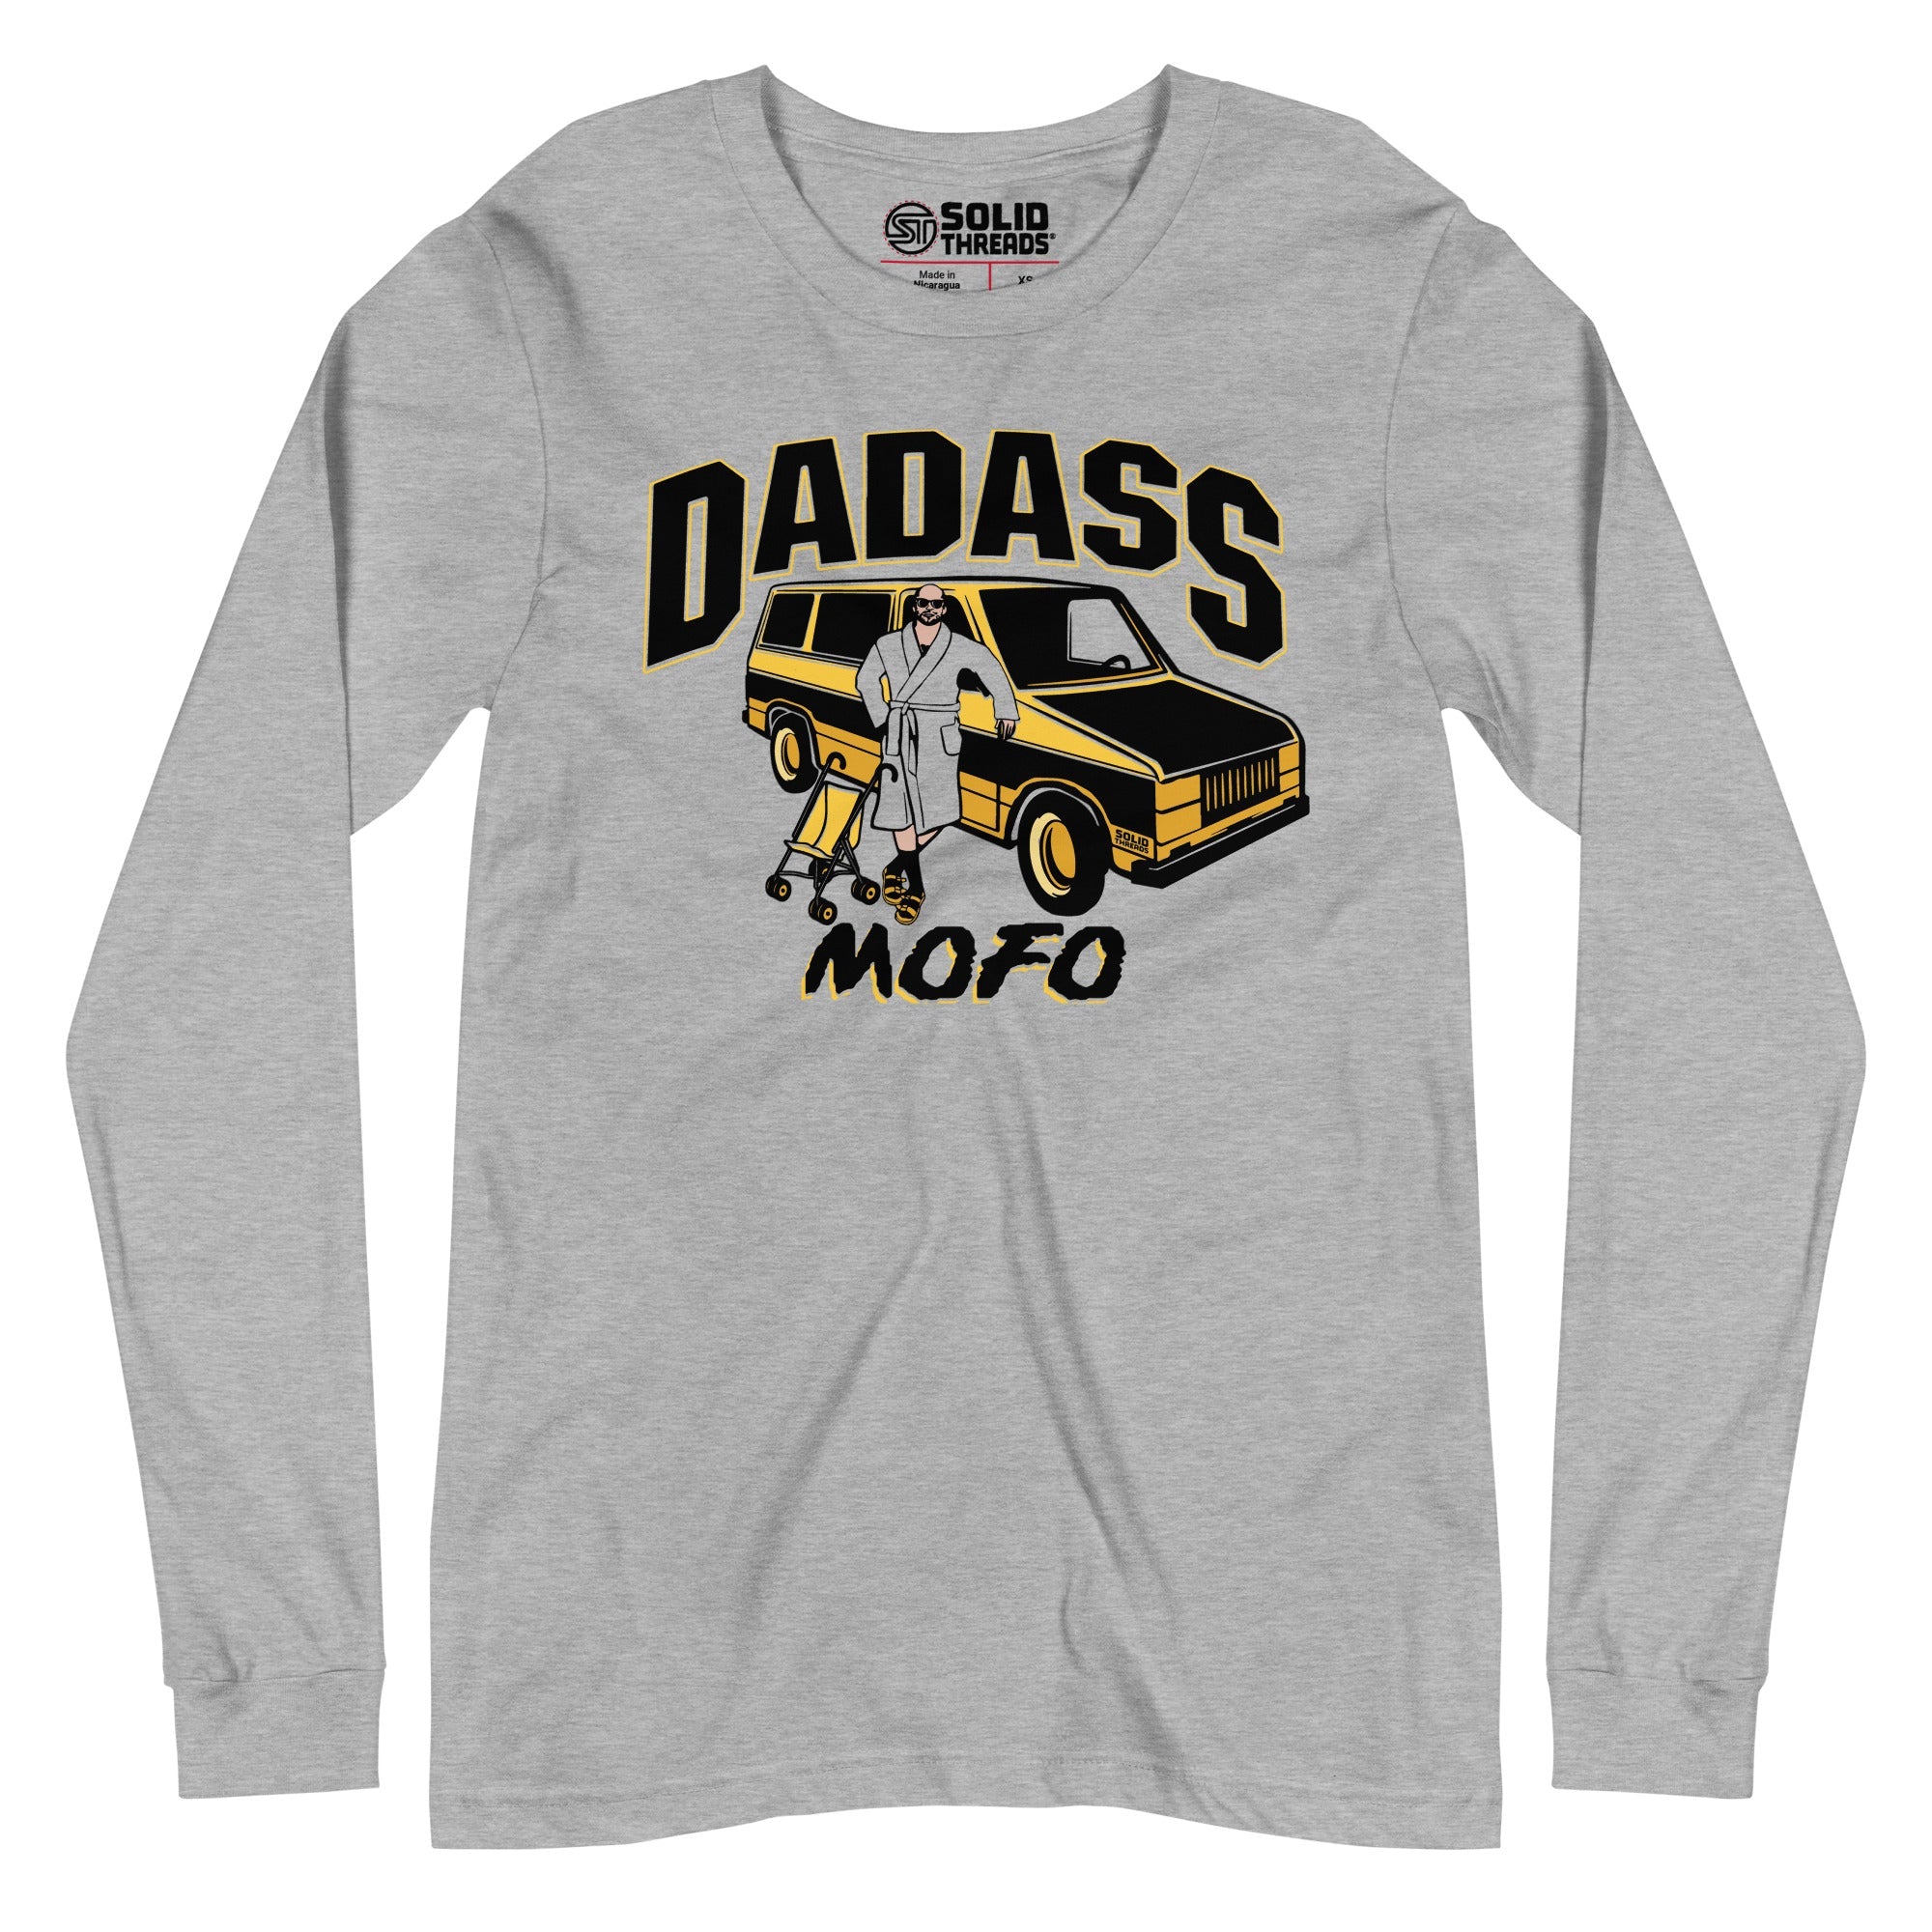 Women's Dadass Vintage Long Sleeve T Shirt | Funny Parenting Graphic Tee | Solid Threads